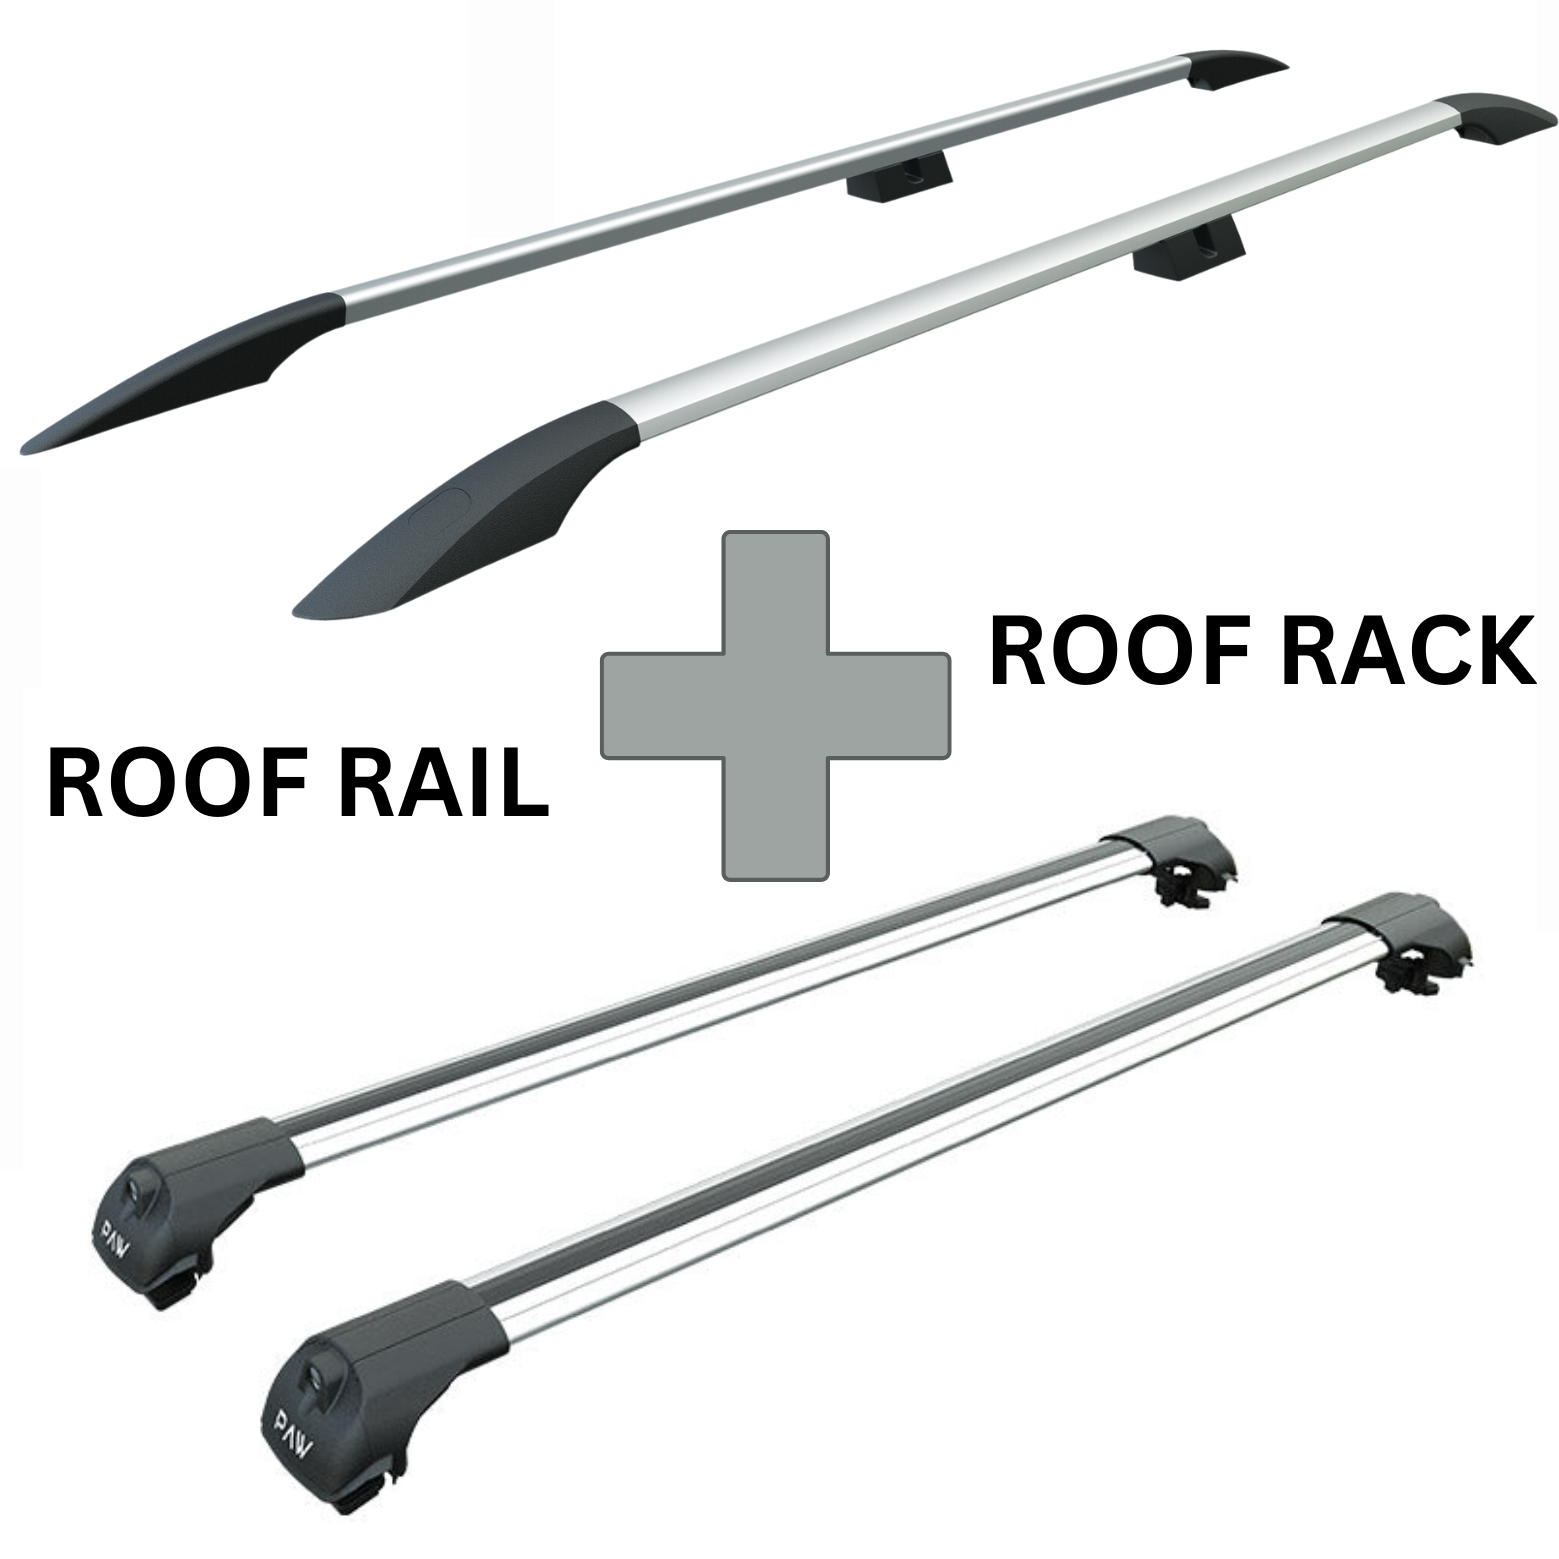 For Volkswagen ID Buzz 2022- Up Roof Side Rails and Roof Rack Cross Bars Alu Silver